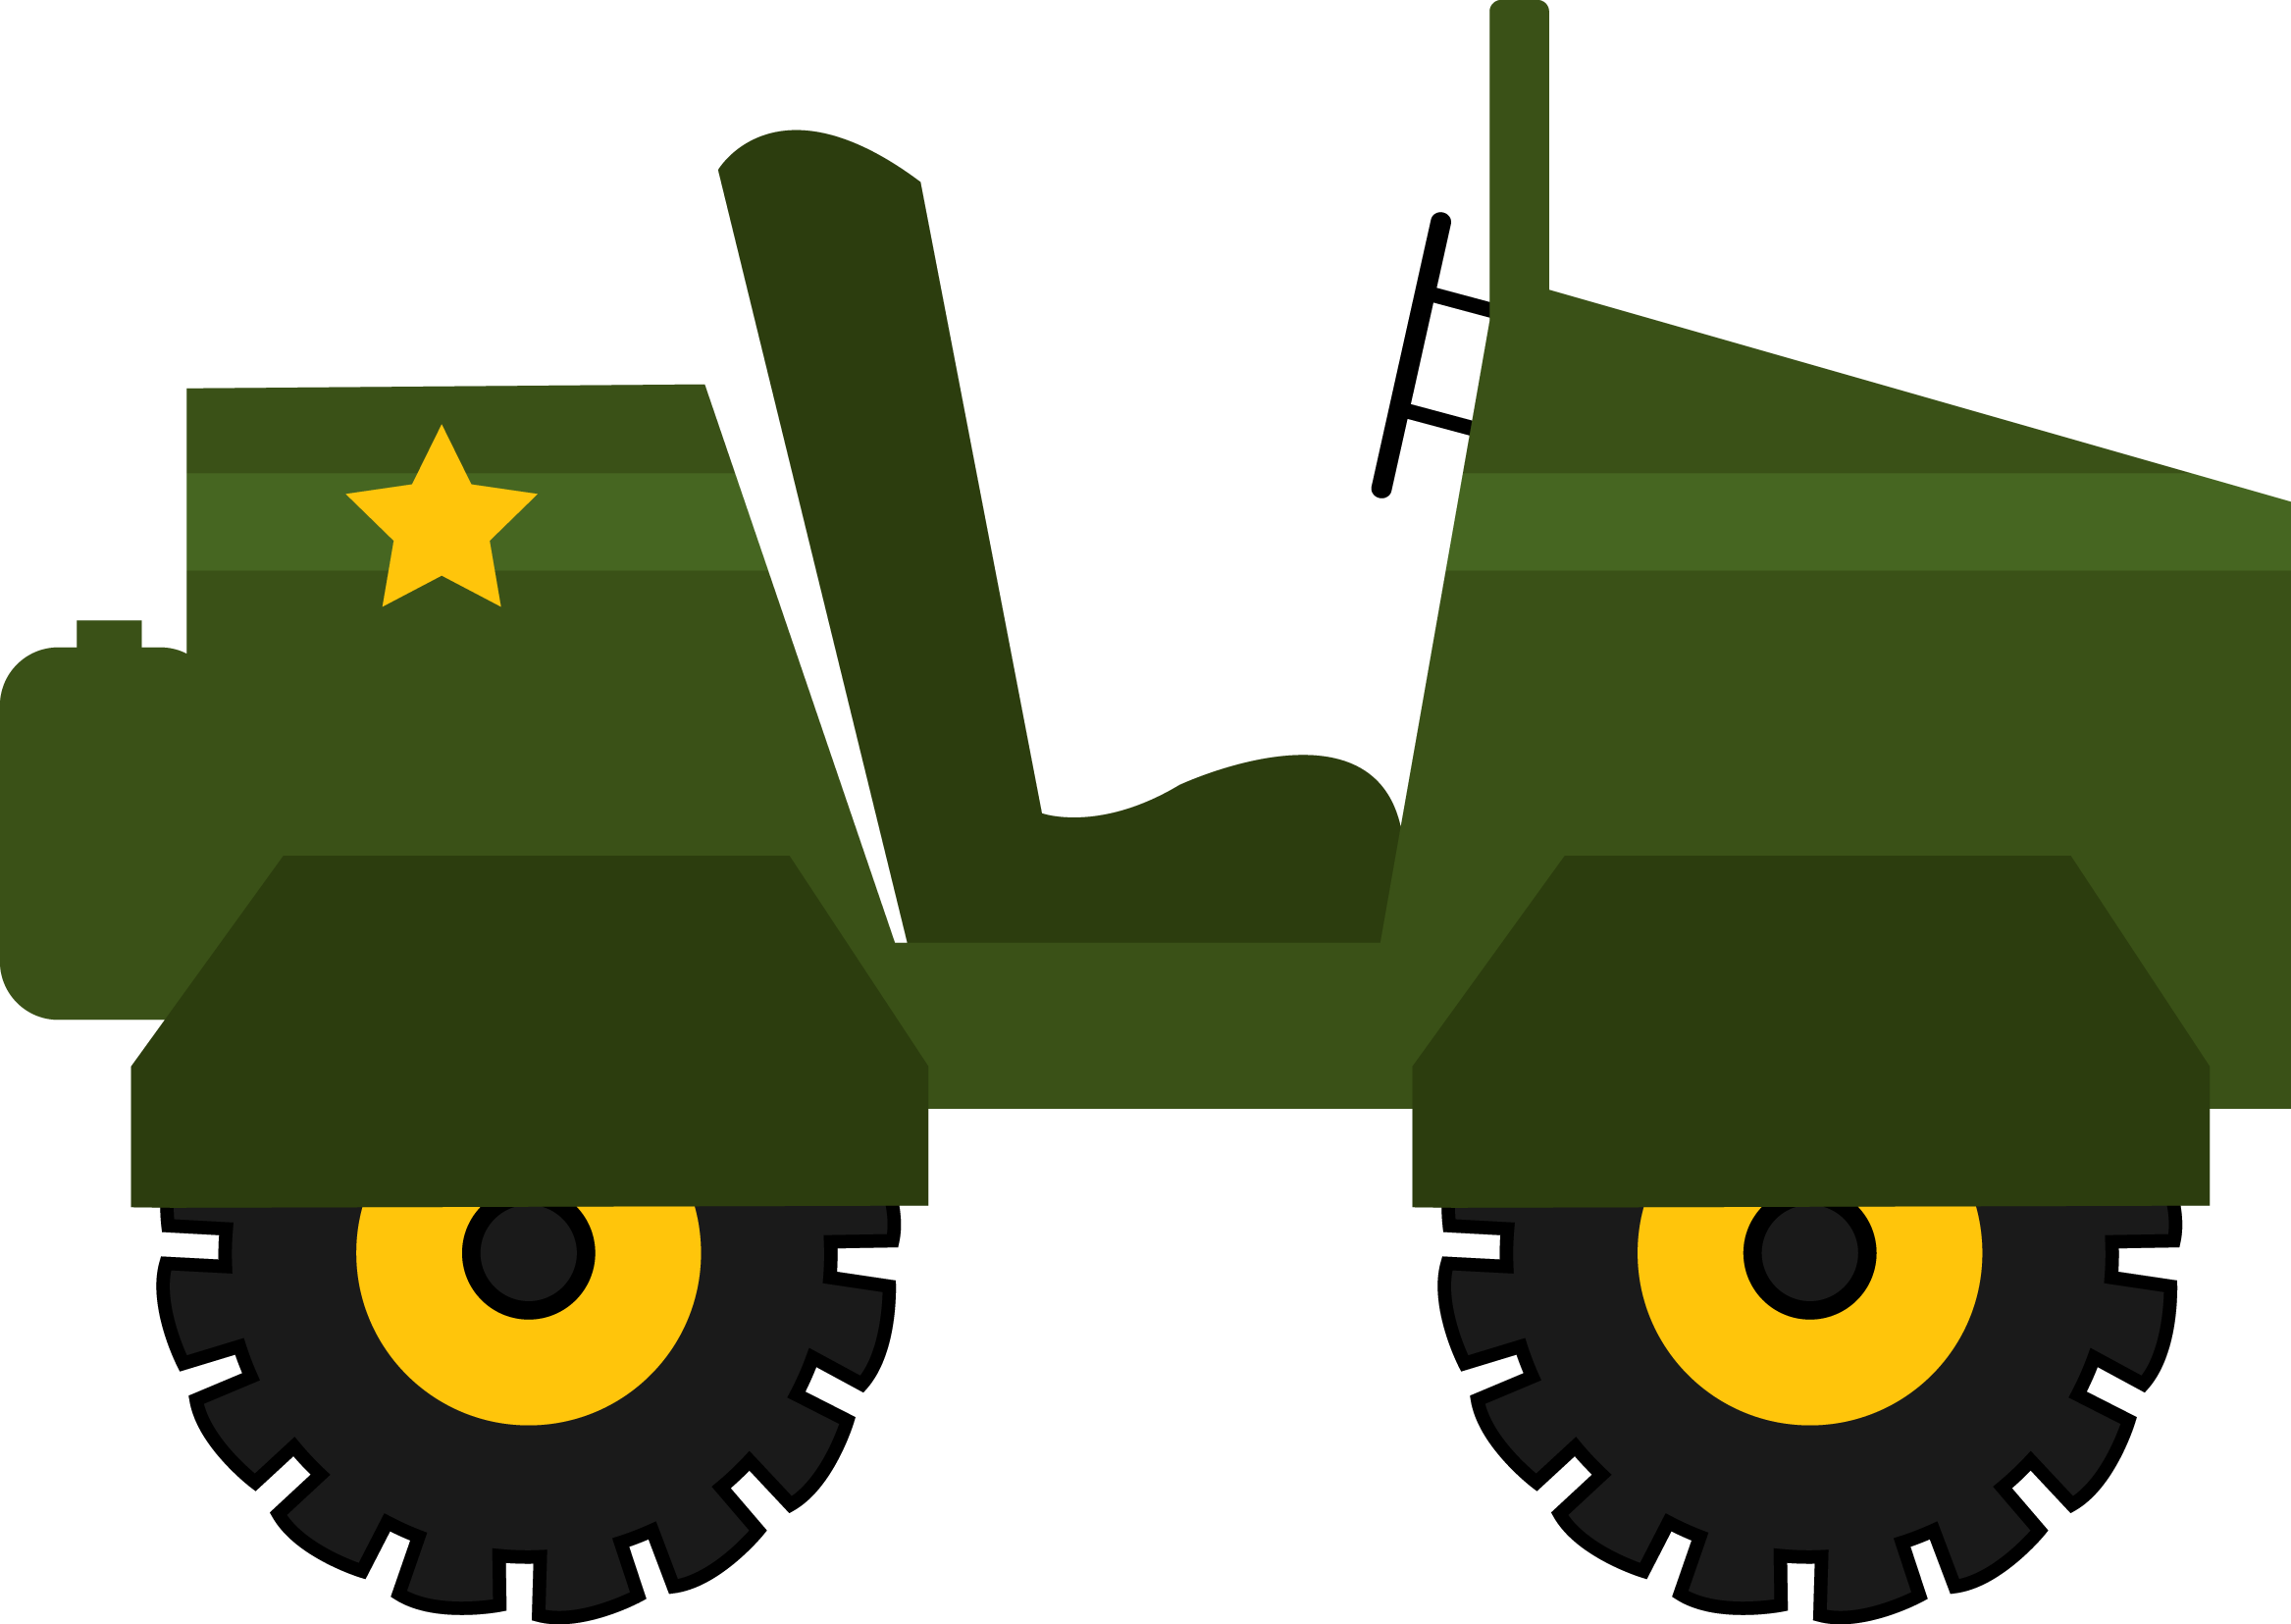 2335x1655 Military Vehicle Clip Art Powerpoint.